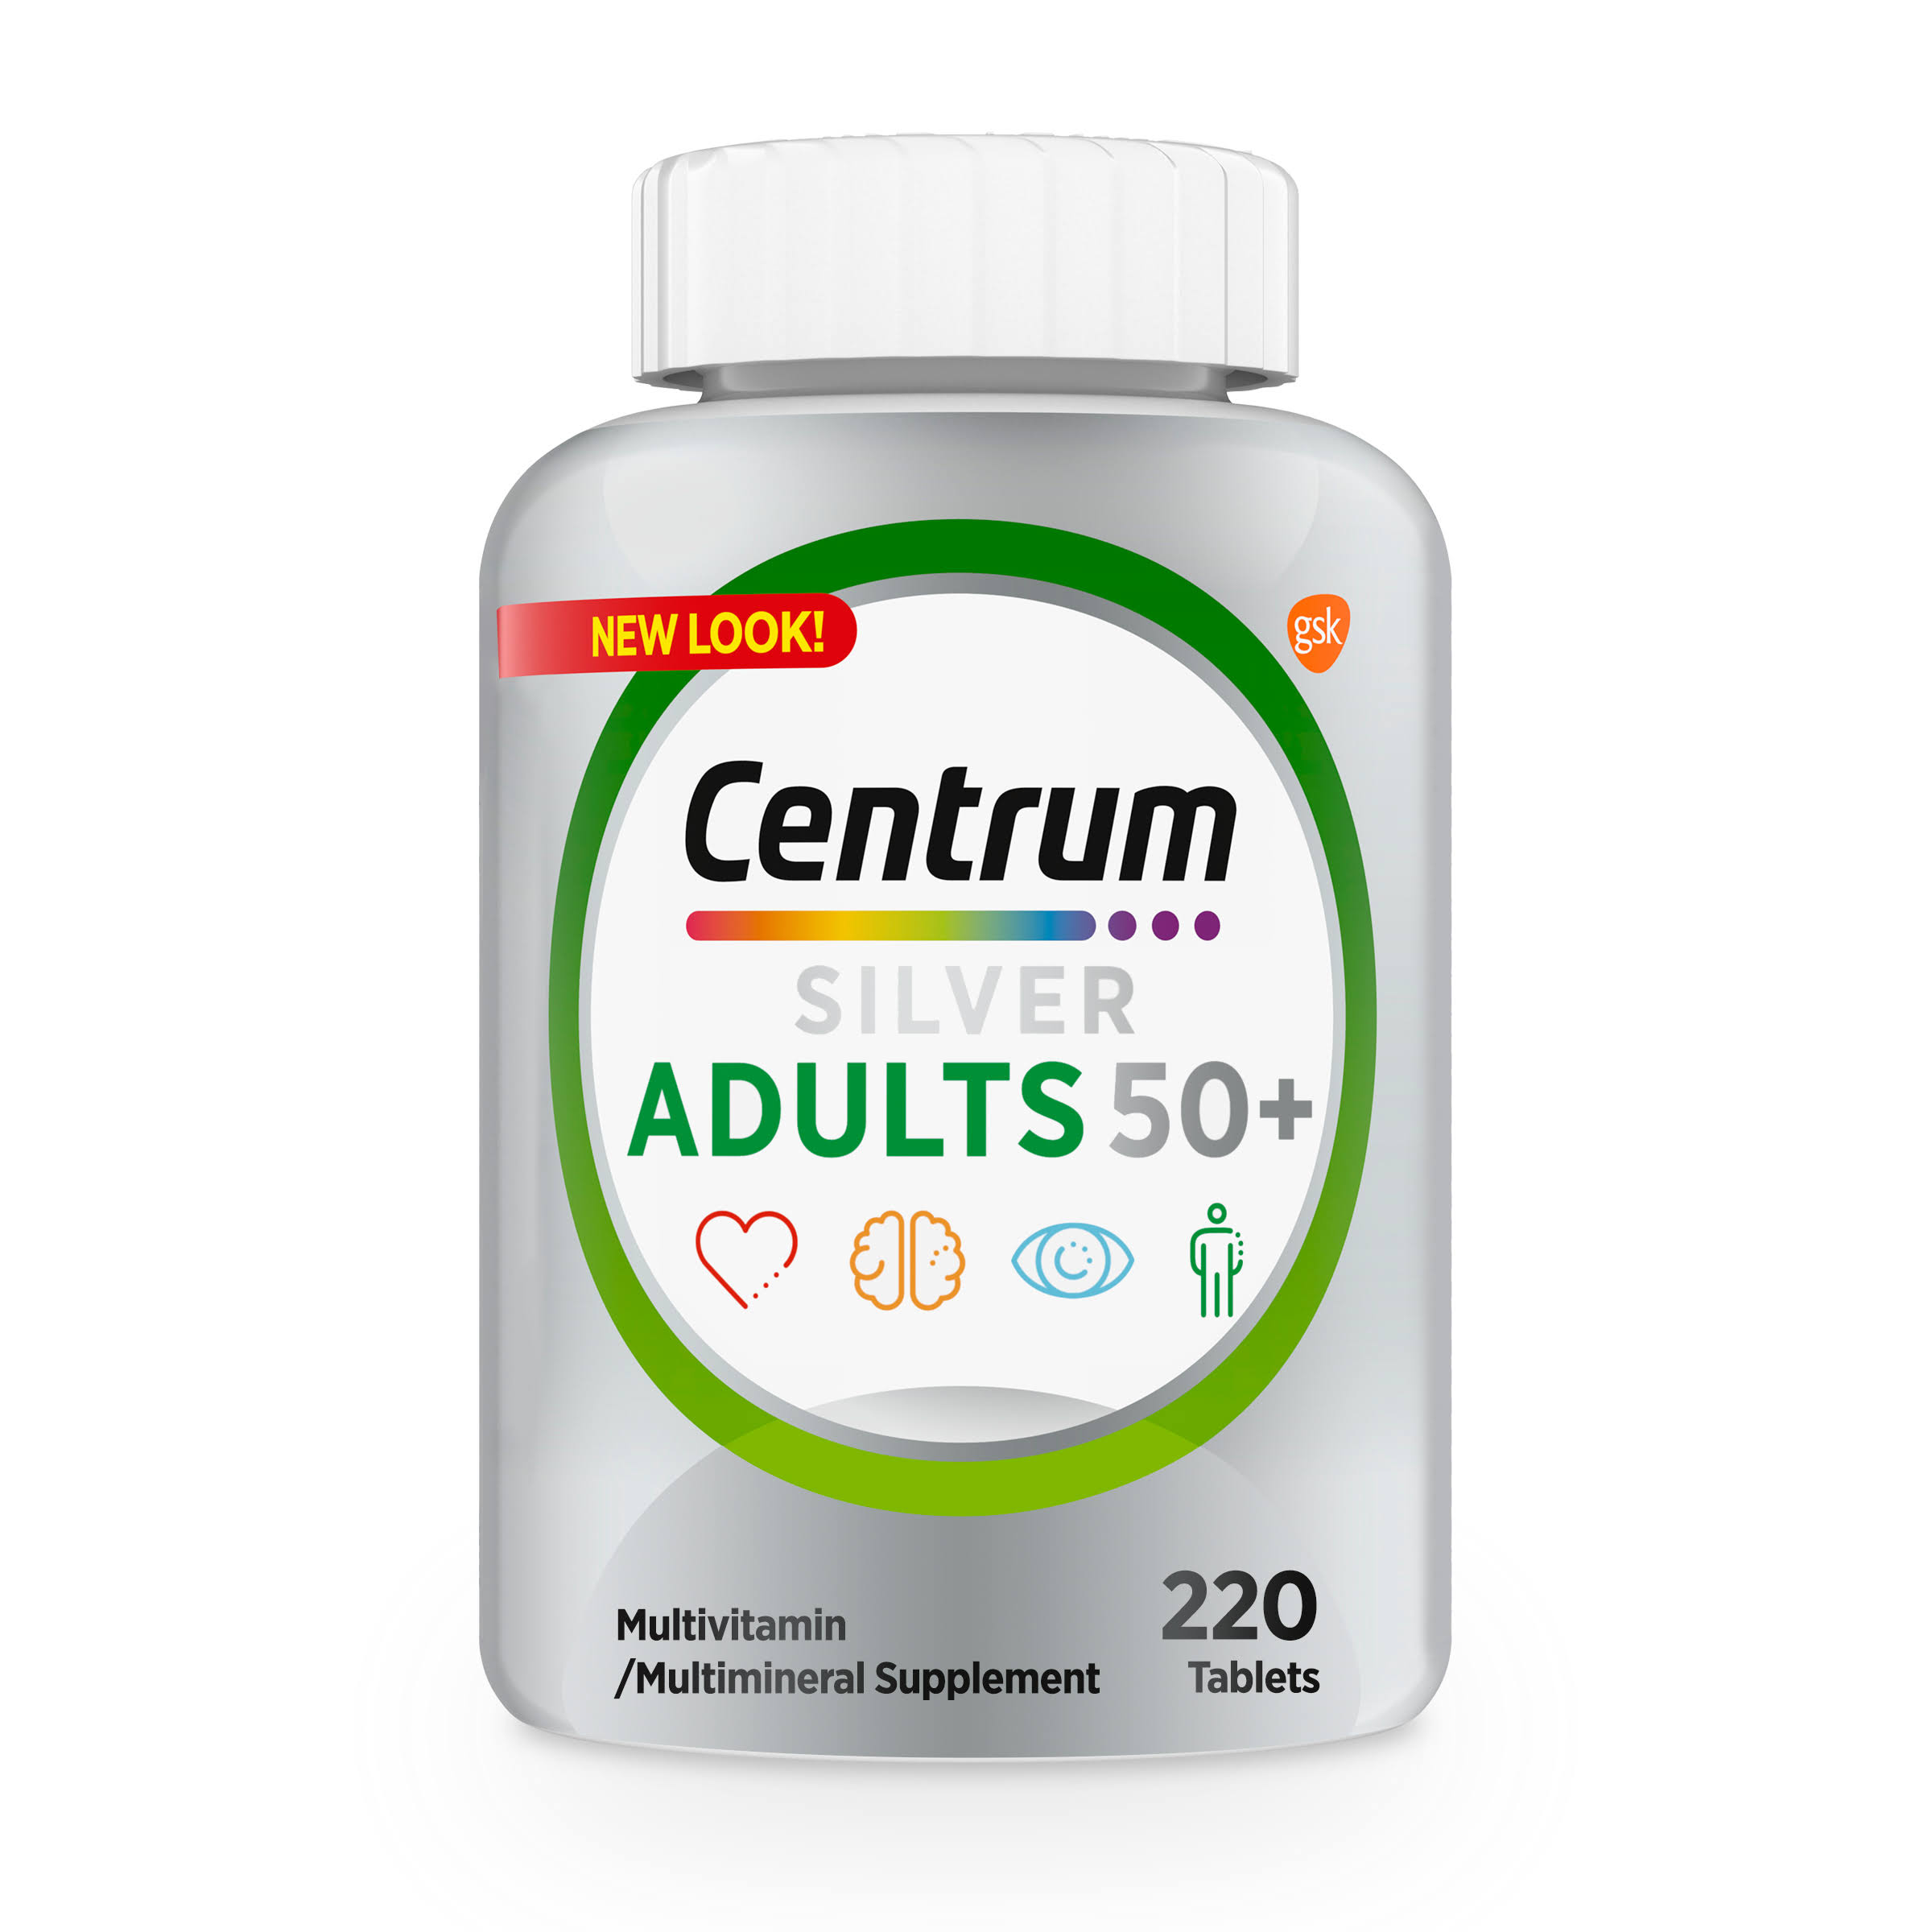 Centrum Silver Multivitamin For Adults 50 Plus - 220 Tablets